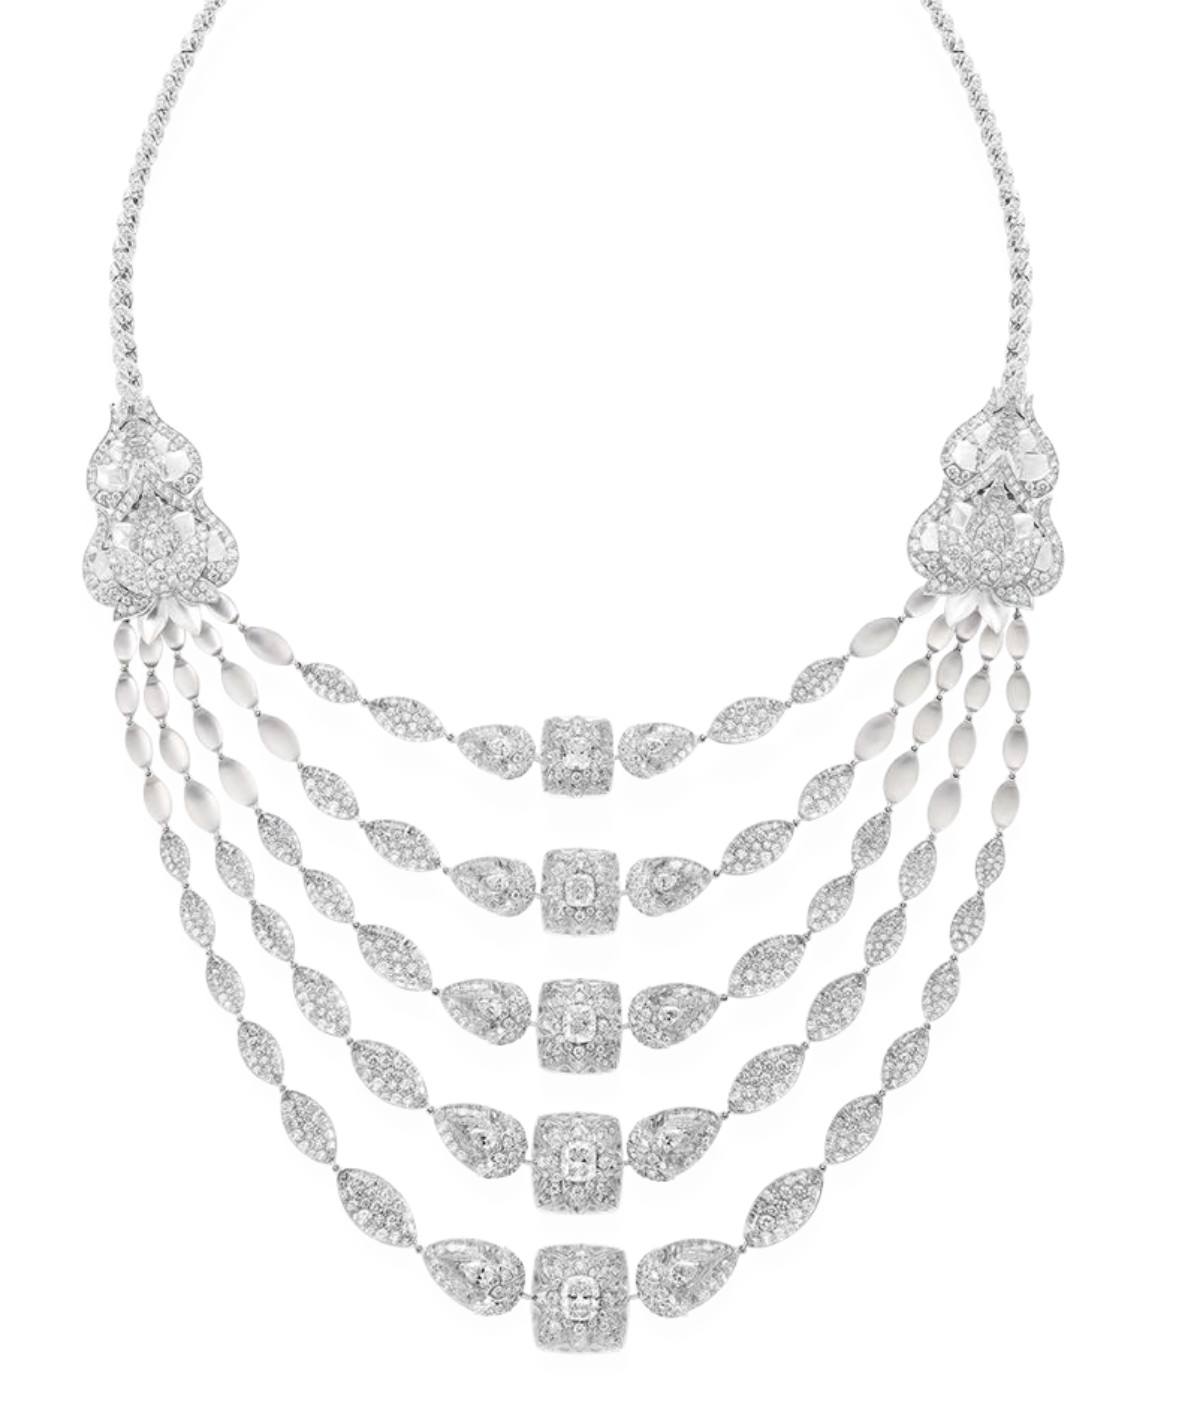 Boucheron Presents Its New High Jewelry Collection: Histoire De Style - New Maharajahs